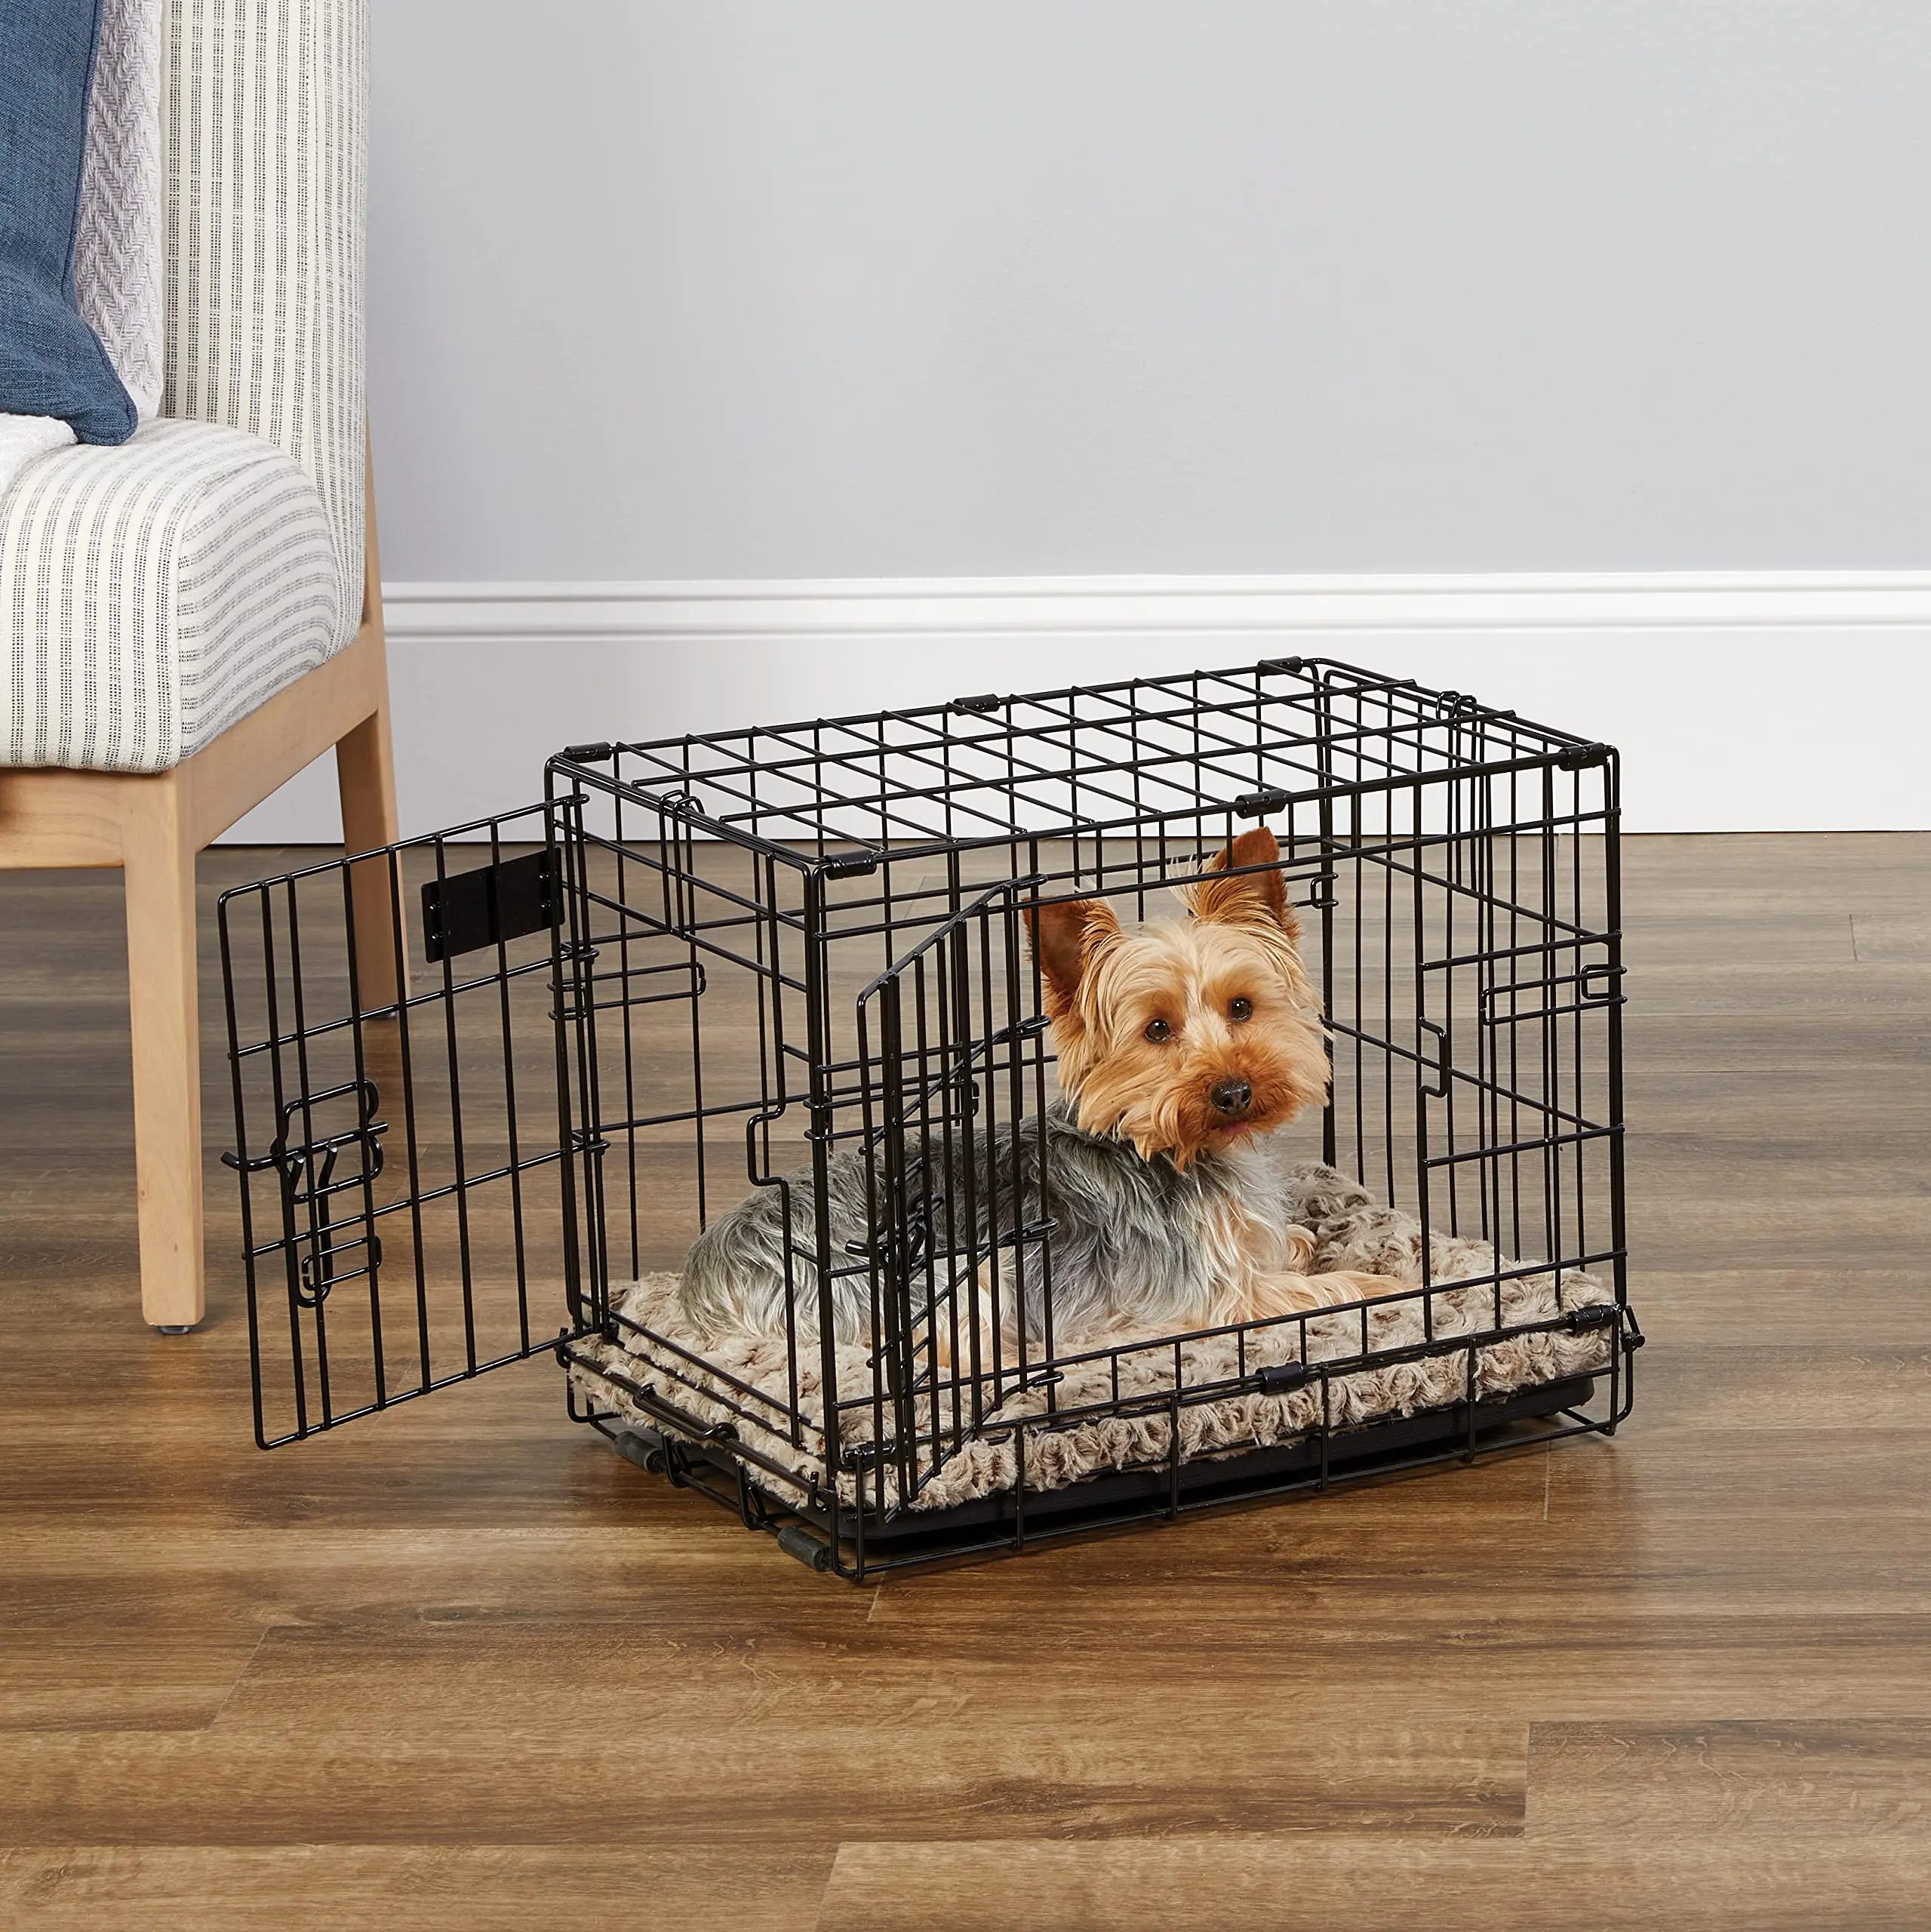 

high quality stainless steel animal cat and dog kennel cage, Picture shows